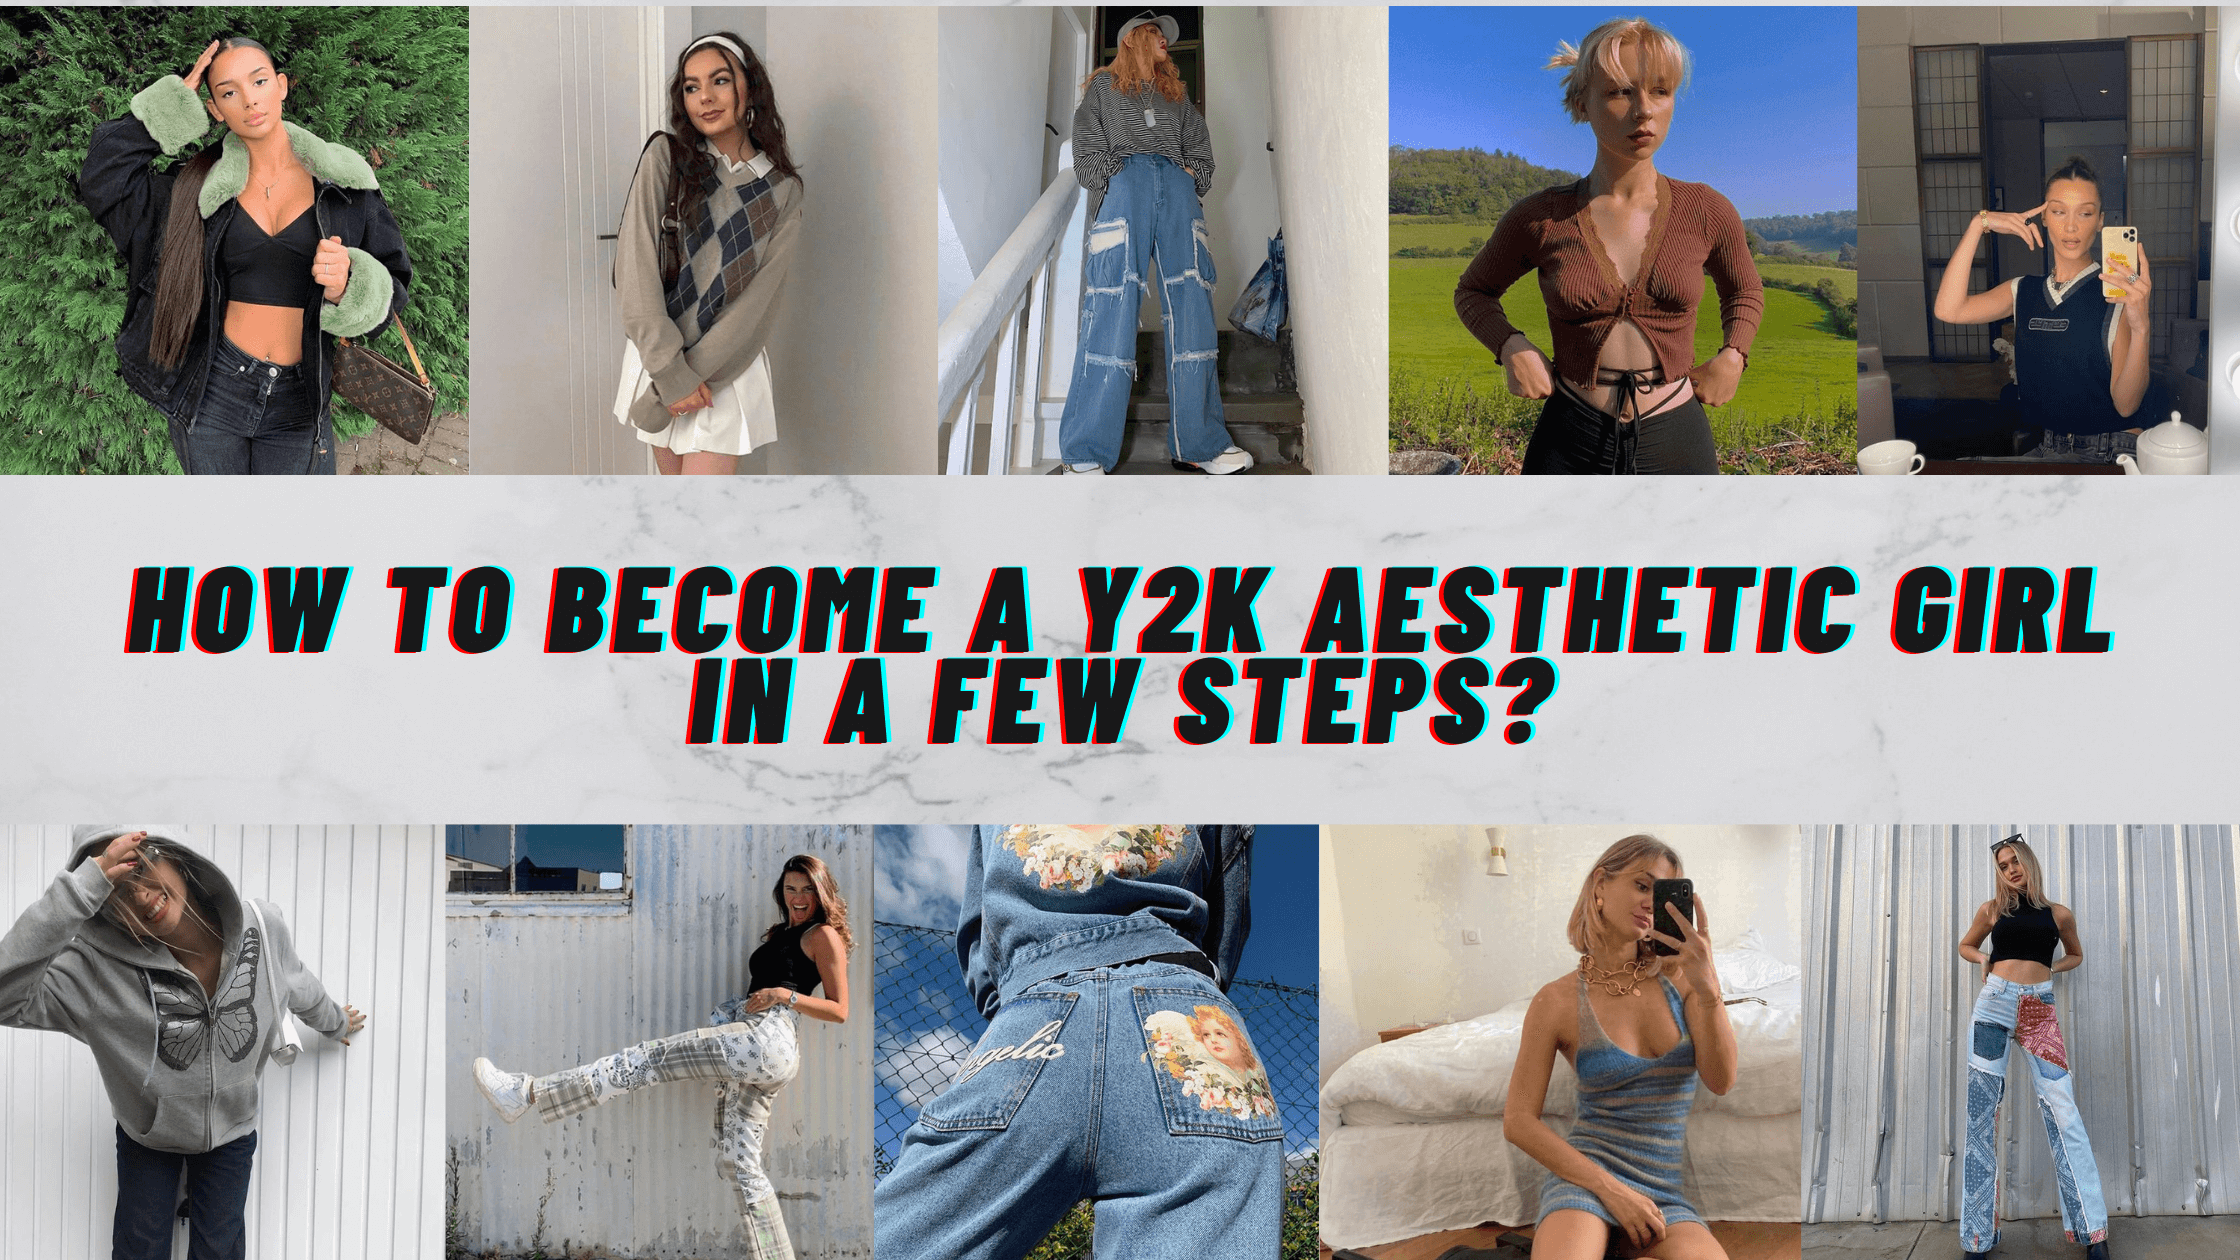 Here's how to bring the Y2K aesthetic to your next website